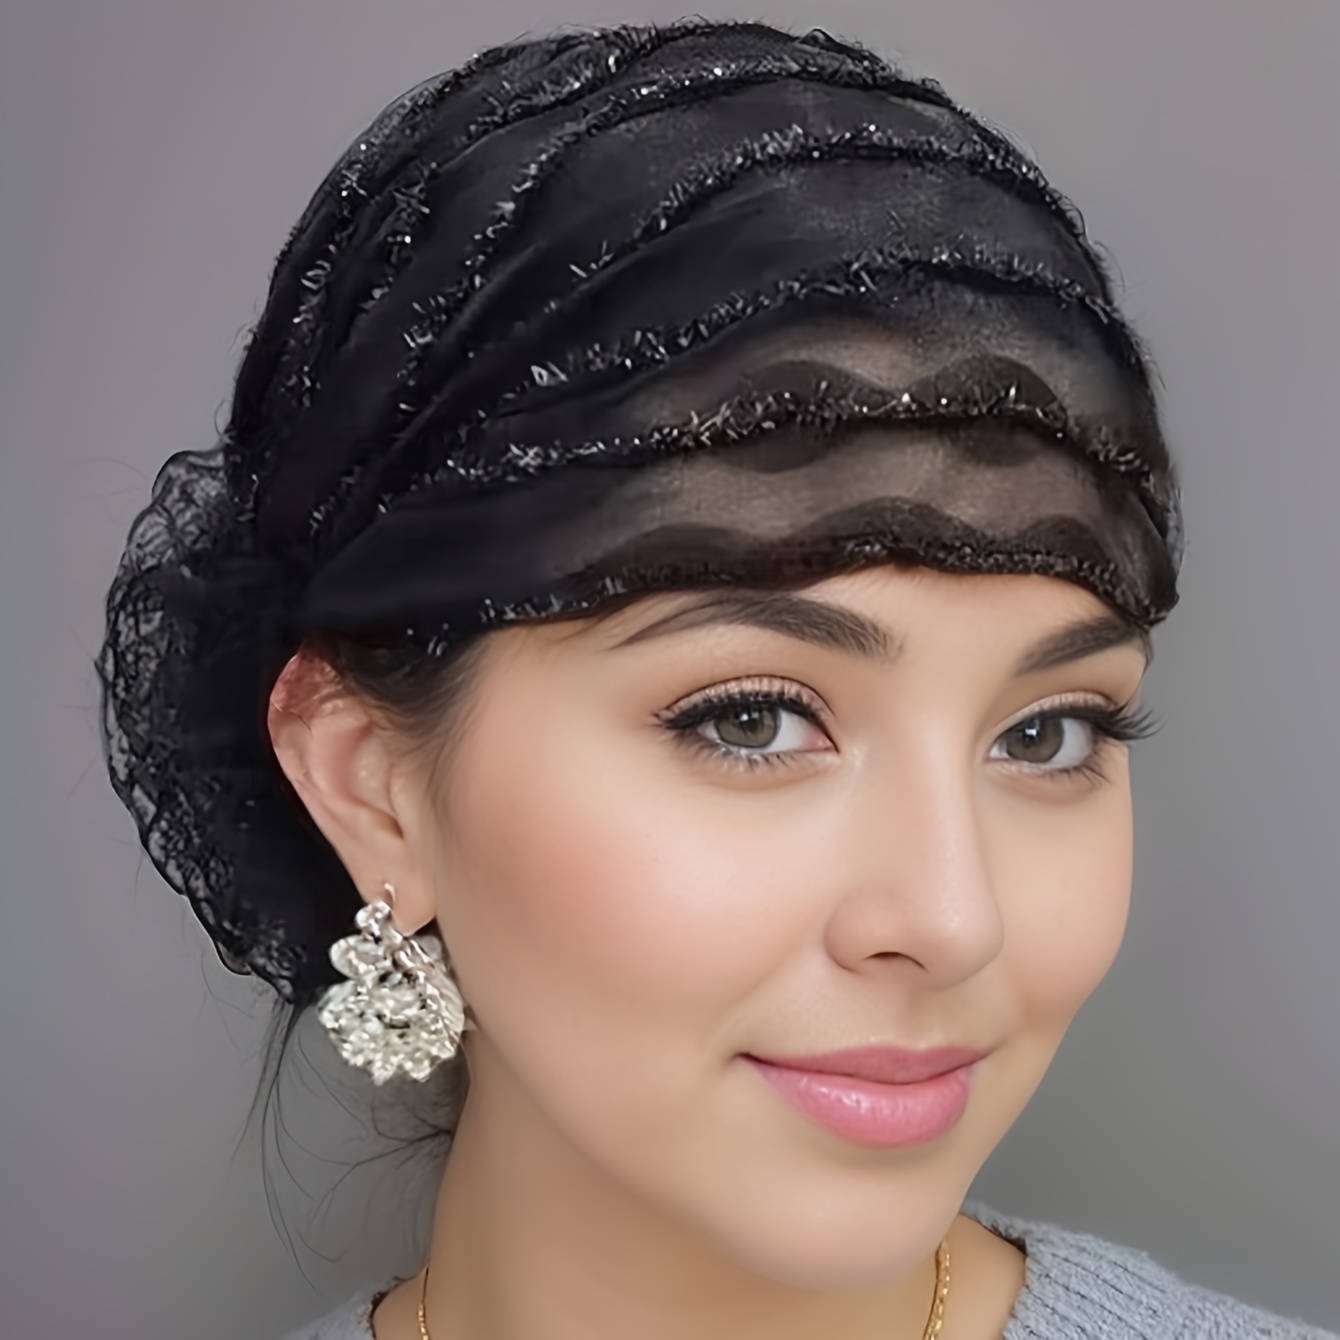 

1pc Glittery Lace Flower Breathable Hair Covering, Elegant Elastic Boho Chic Muslim Turban Hat, Mesh Back Chemo Hat For Daily Wear & Mother's Day Gift For Music Festival